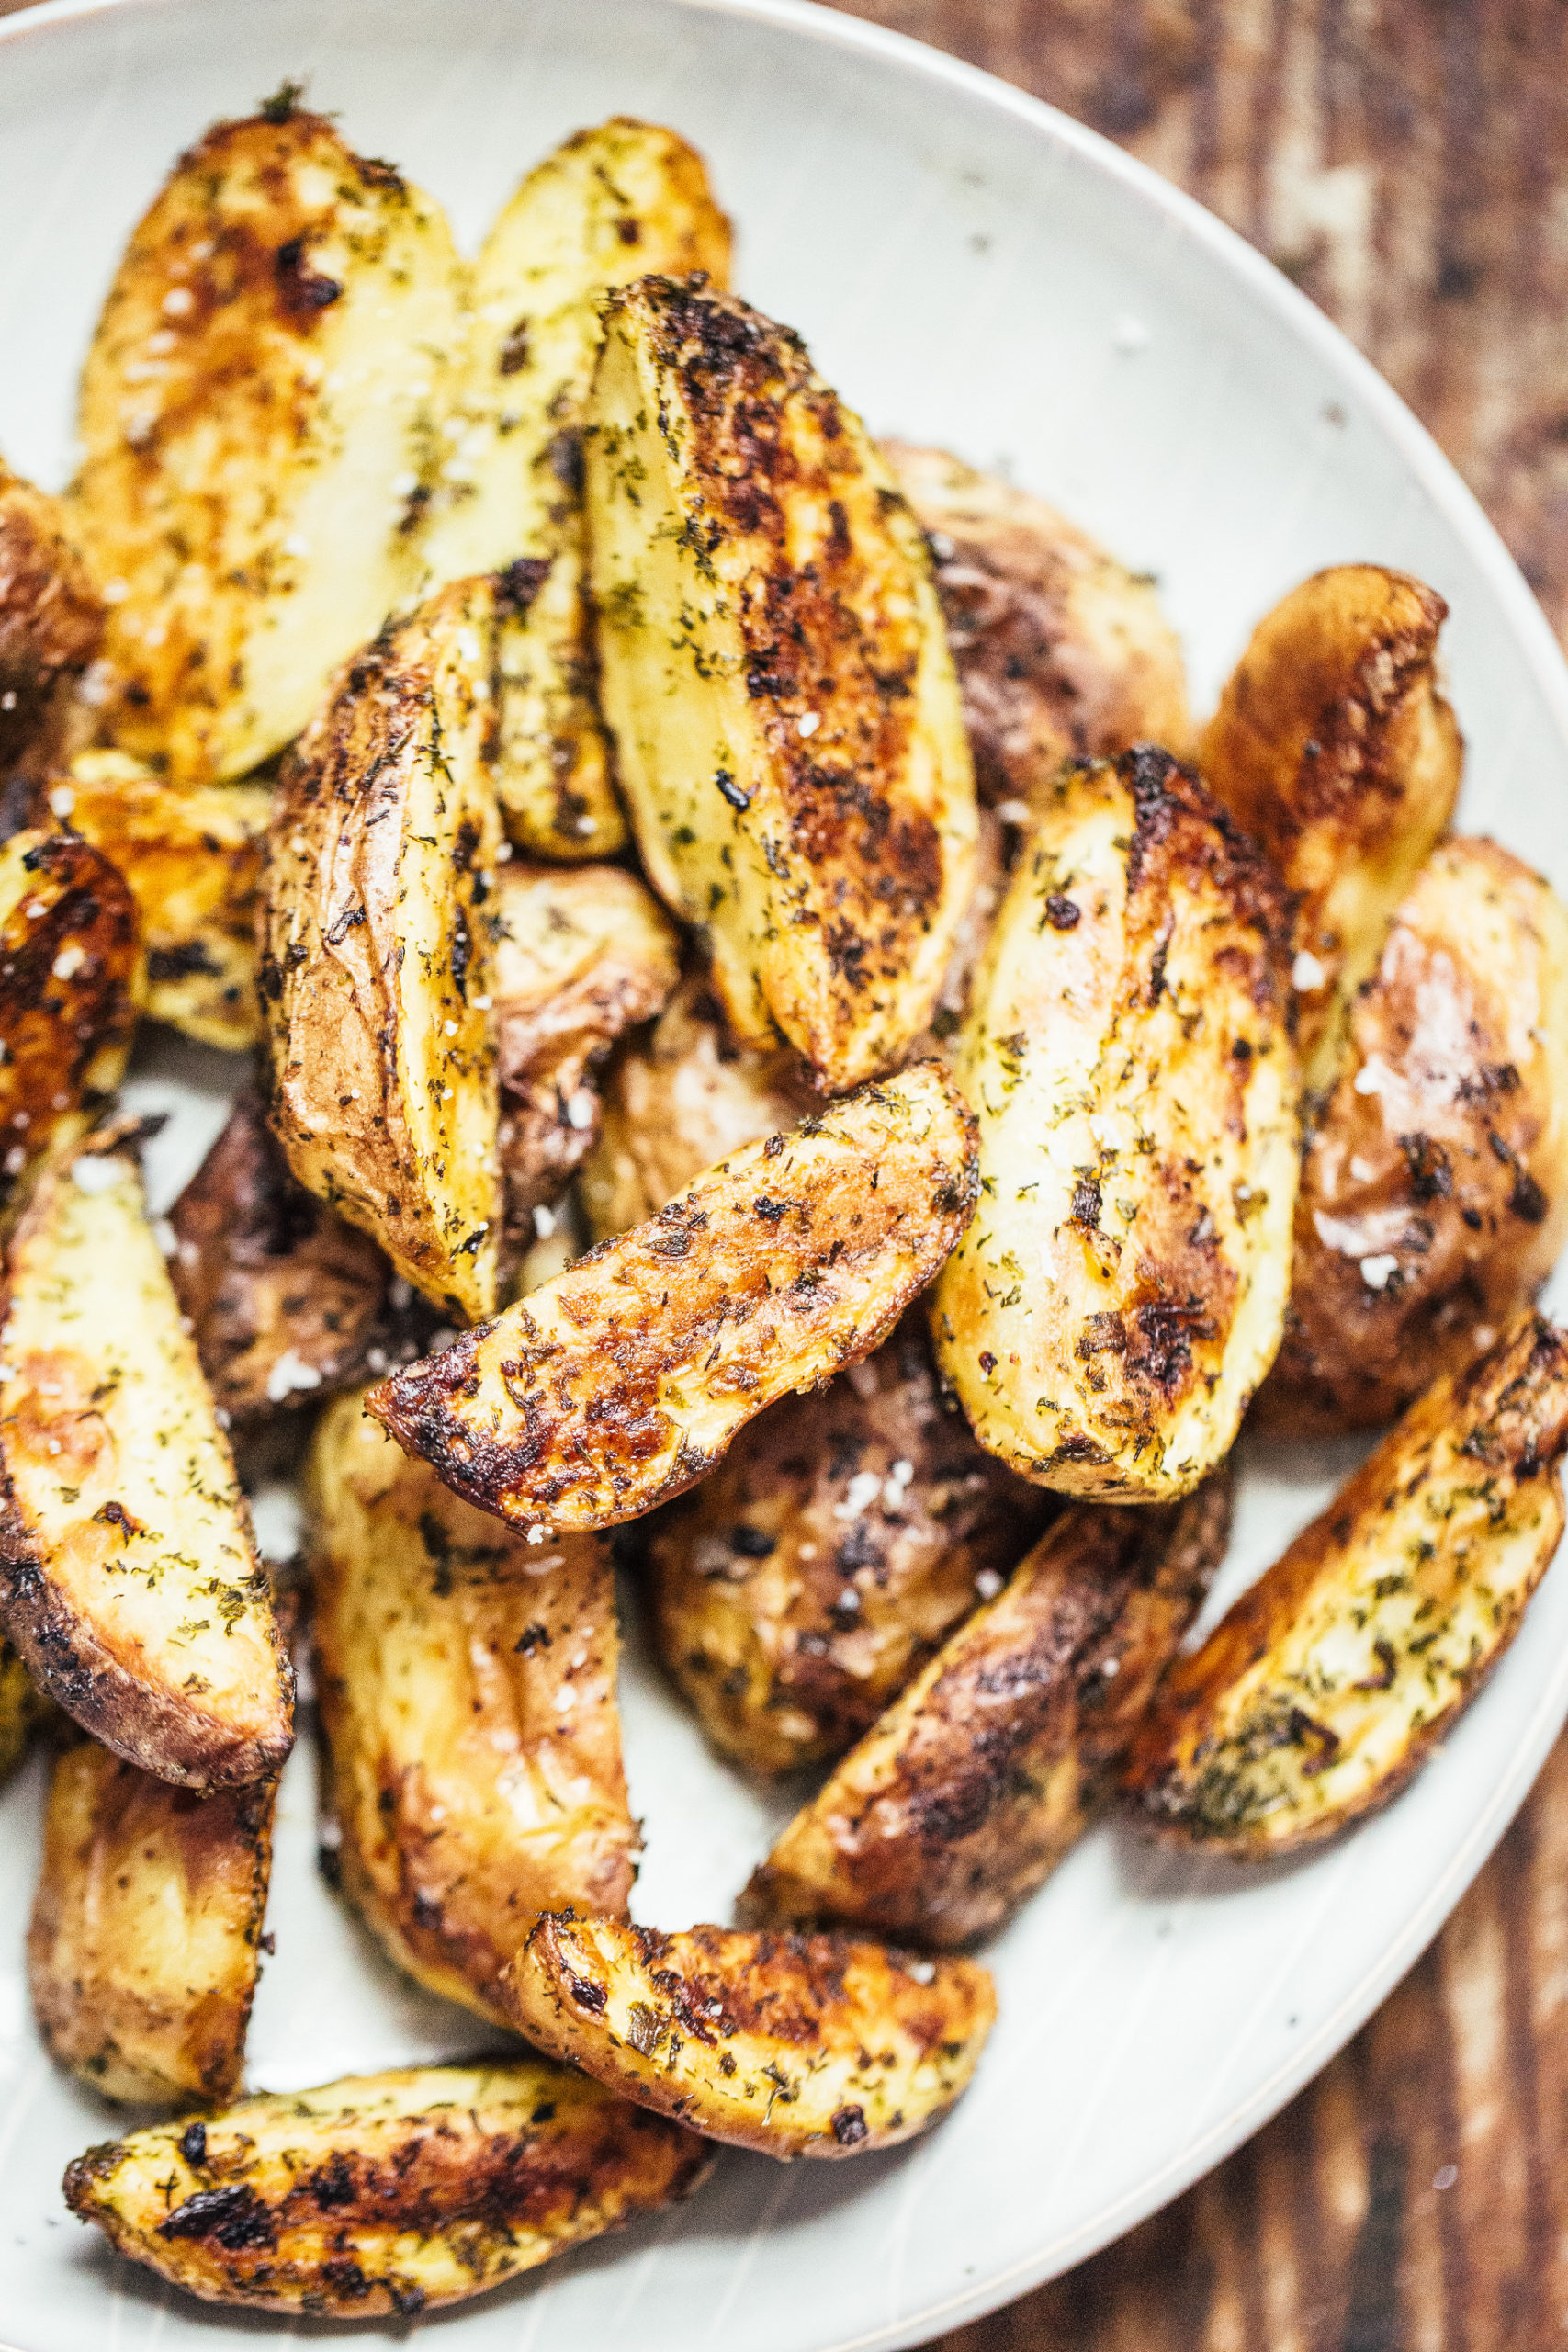 How to make herb roasted potato wedges